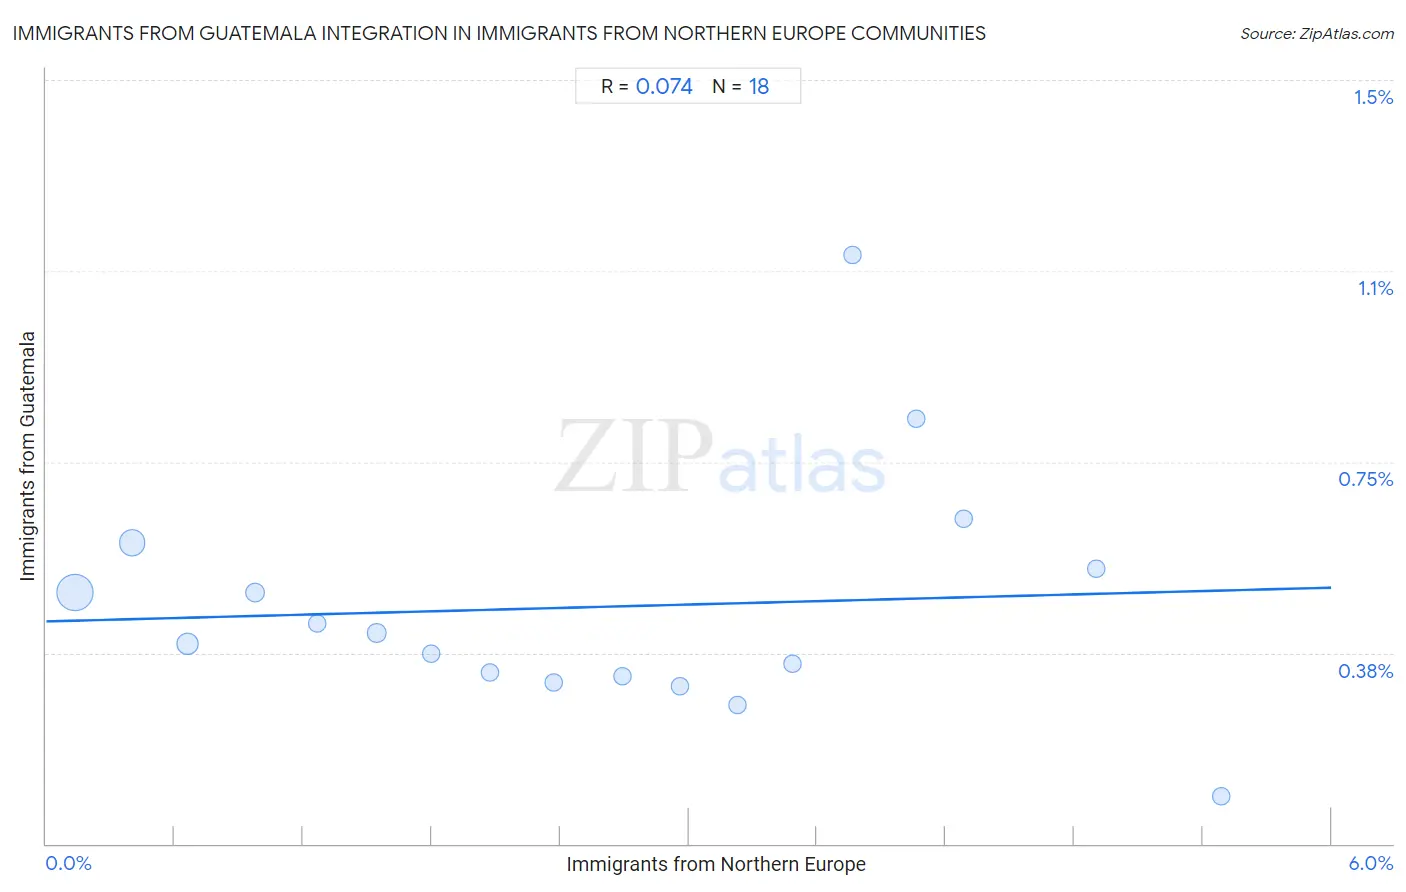 Immigrants from Northern Europe Integration in Immigrants from Guatemala Communities